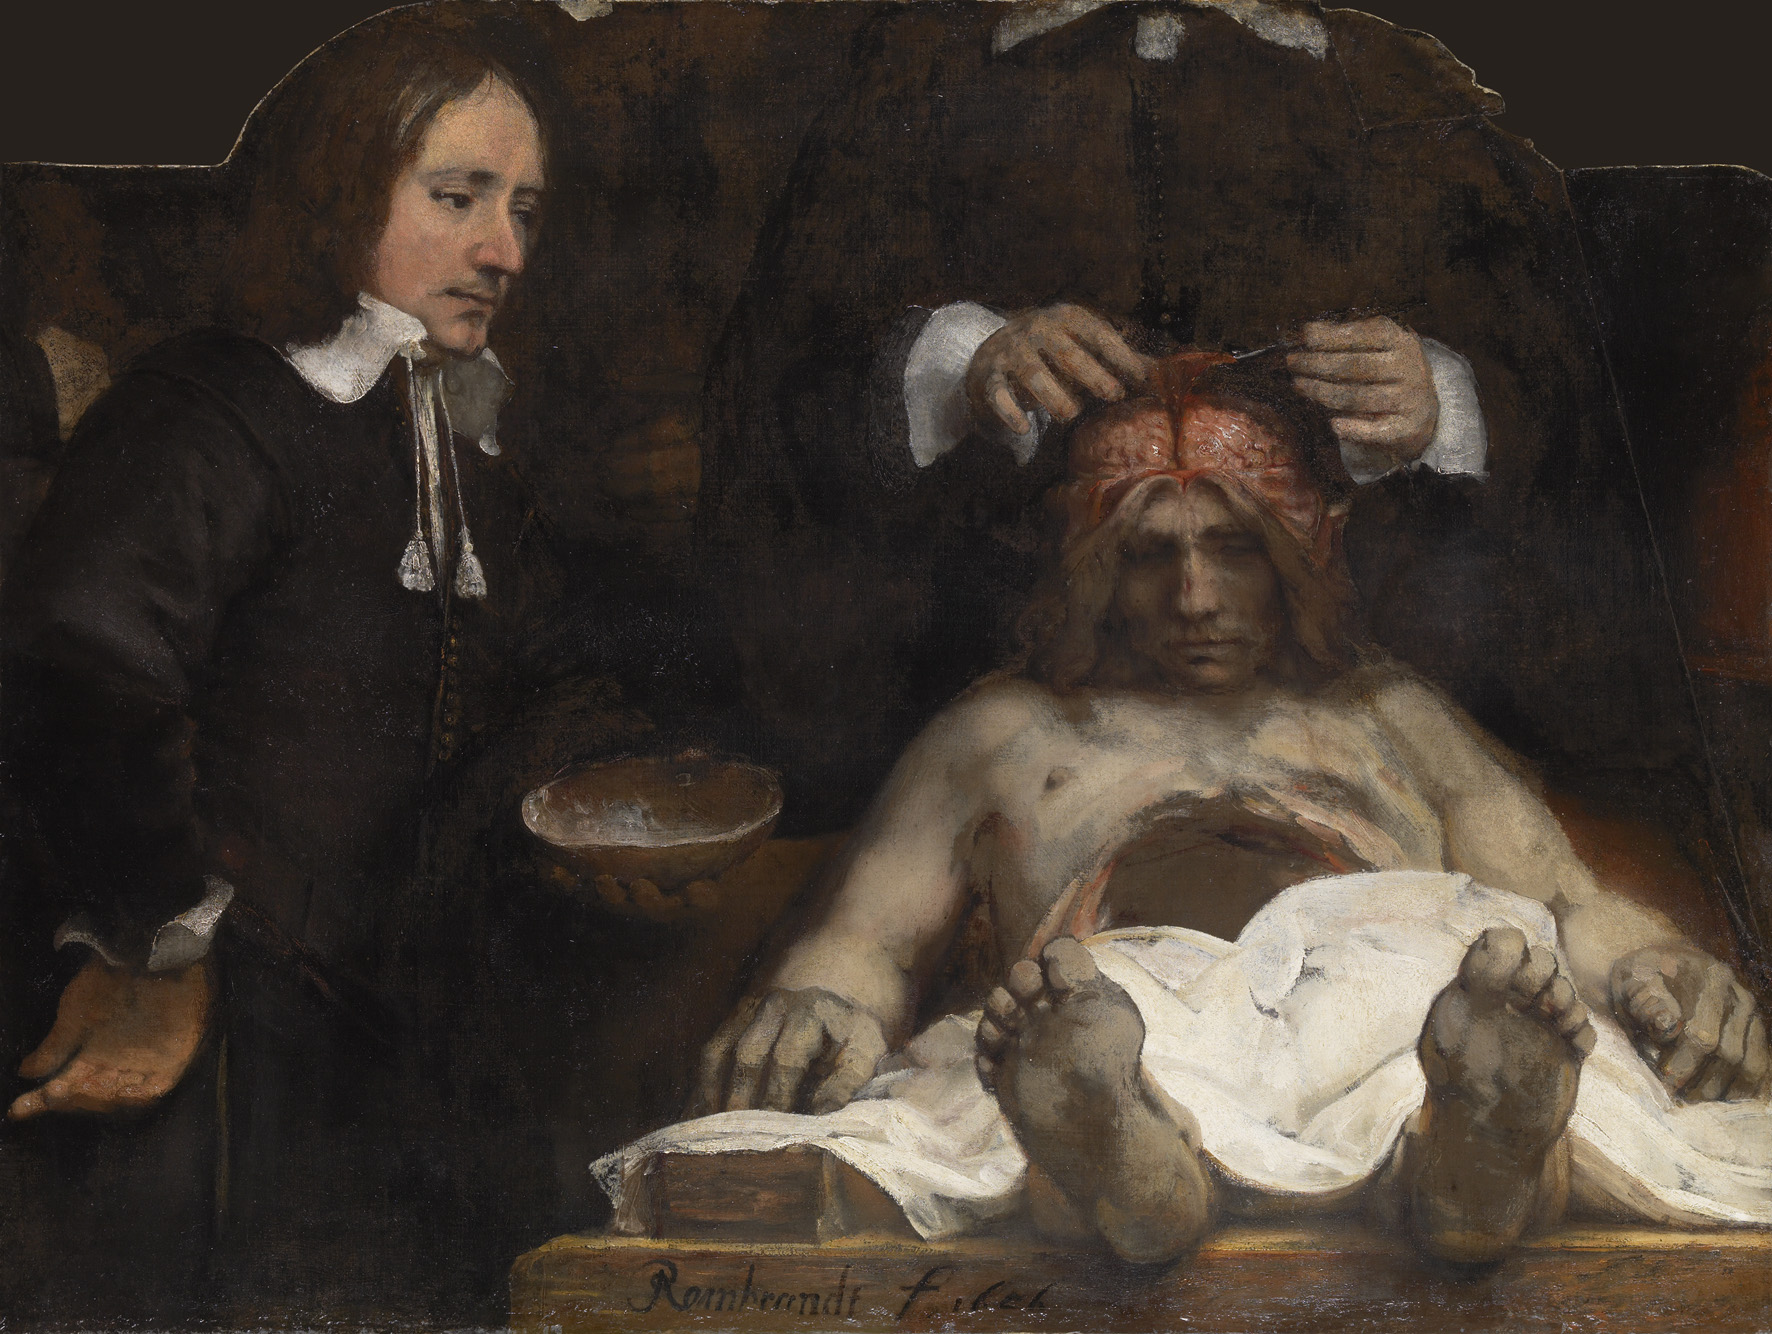 X7905
Rembrandt
The Anatomy Lesson of Dr Joan Deyman, 1656
Oil on canvas
100 x 134 cm
© Amsterdam Museum (SA 7394)